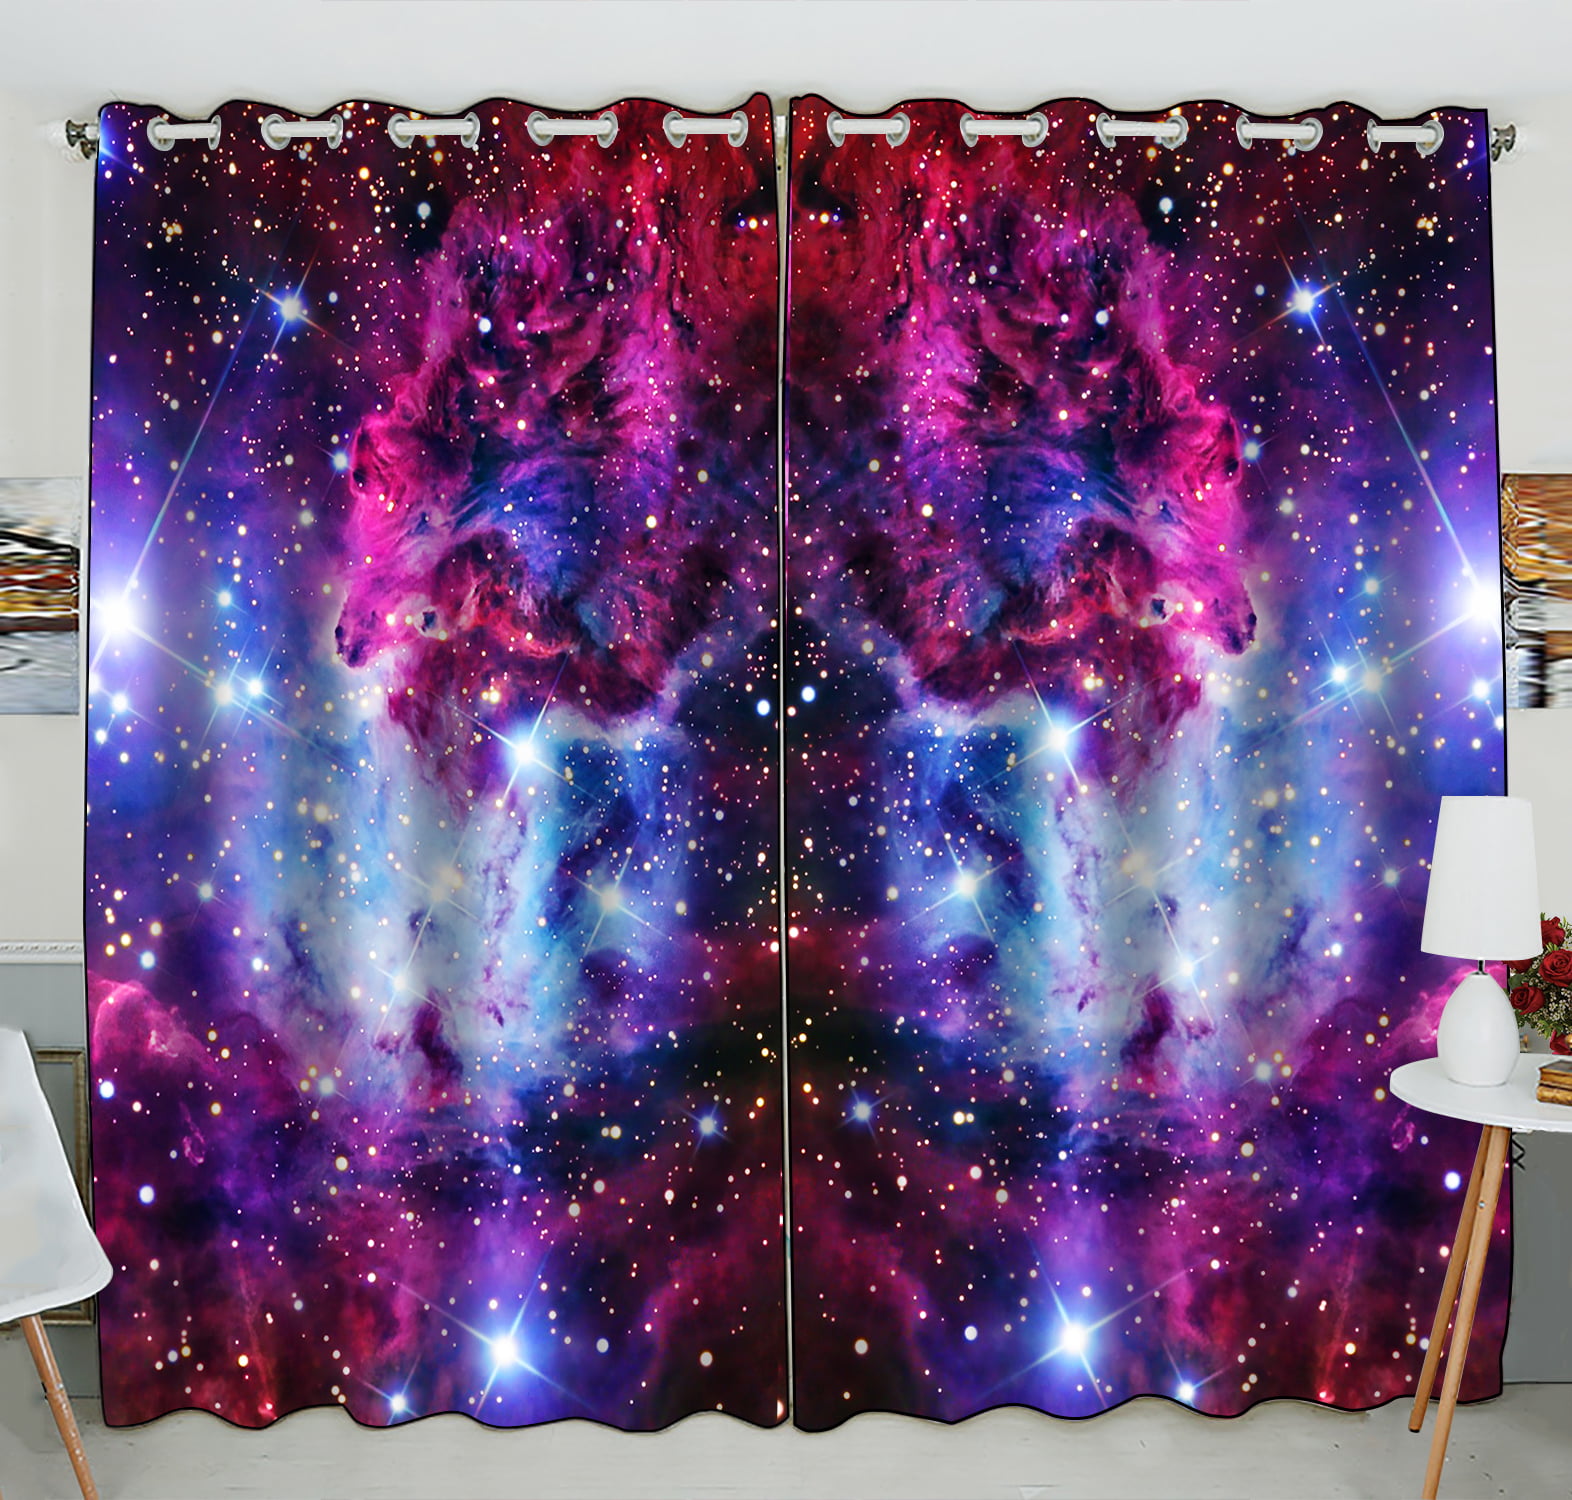 42 W x 63 L 1 Panel BlessLiving Colorful Toy Window Curtain Blocks Background Pattern Blackout Curtains Fun and Colorful Curtains Drapes for Kids Teen Boys Girls Grommet